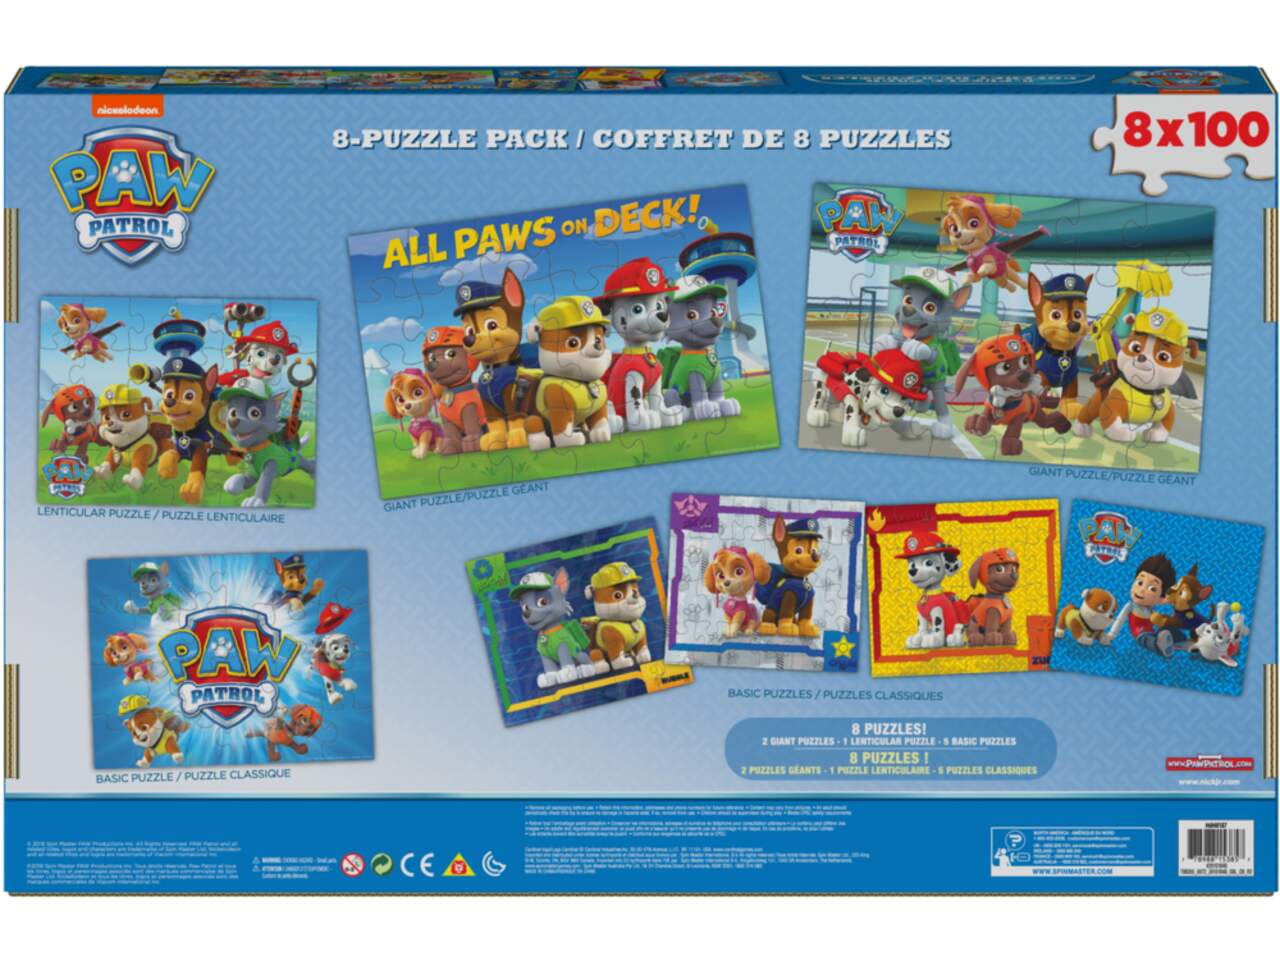 Cardinal 12-Pack Puzzles, Assorted, Age 4+